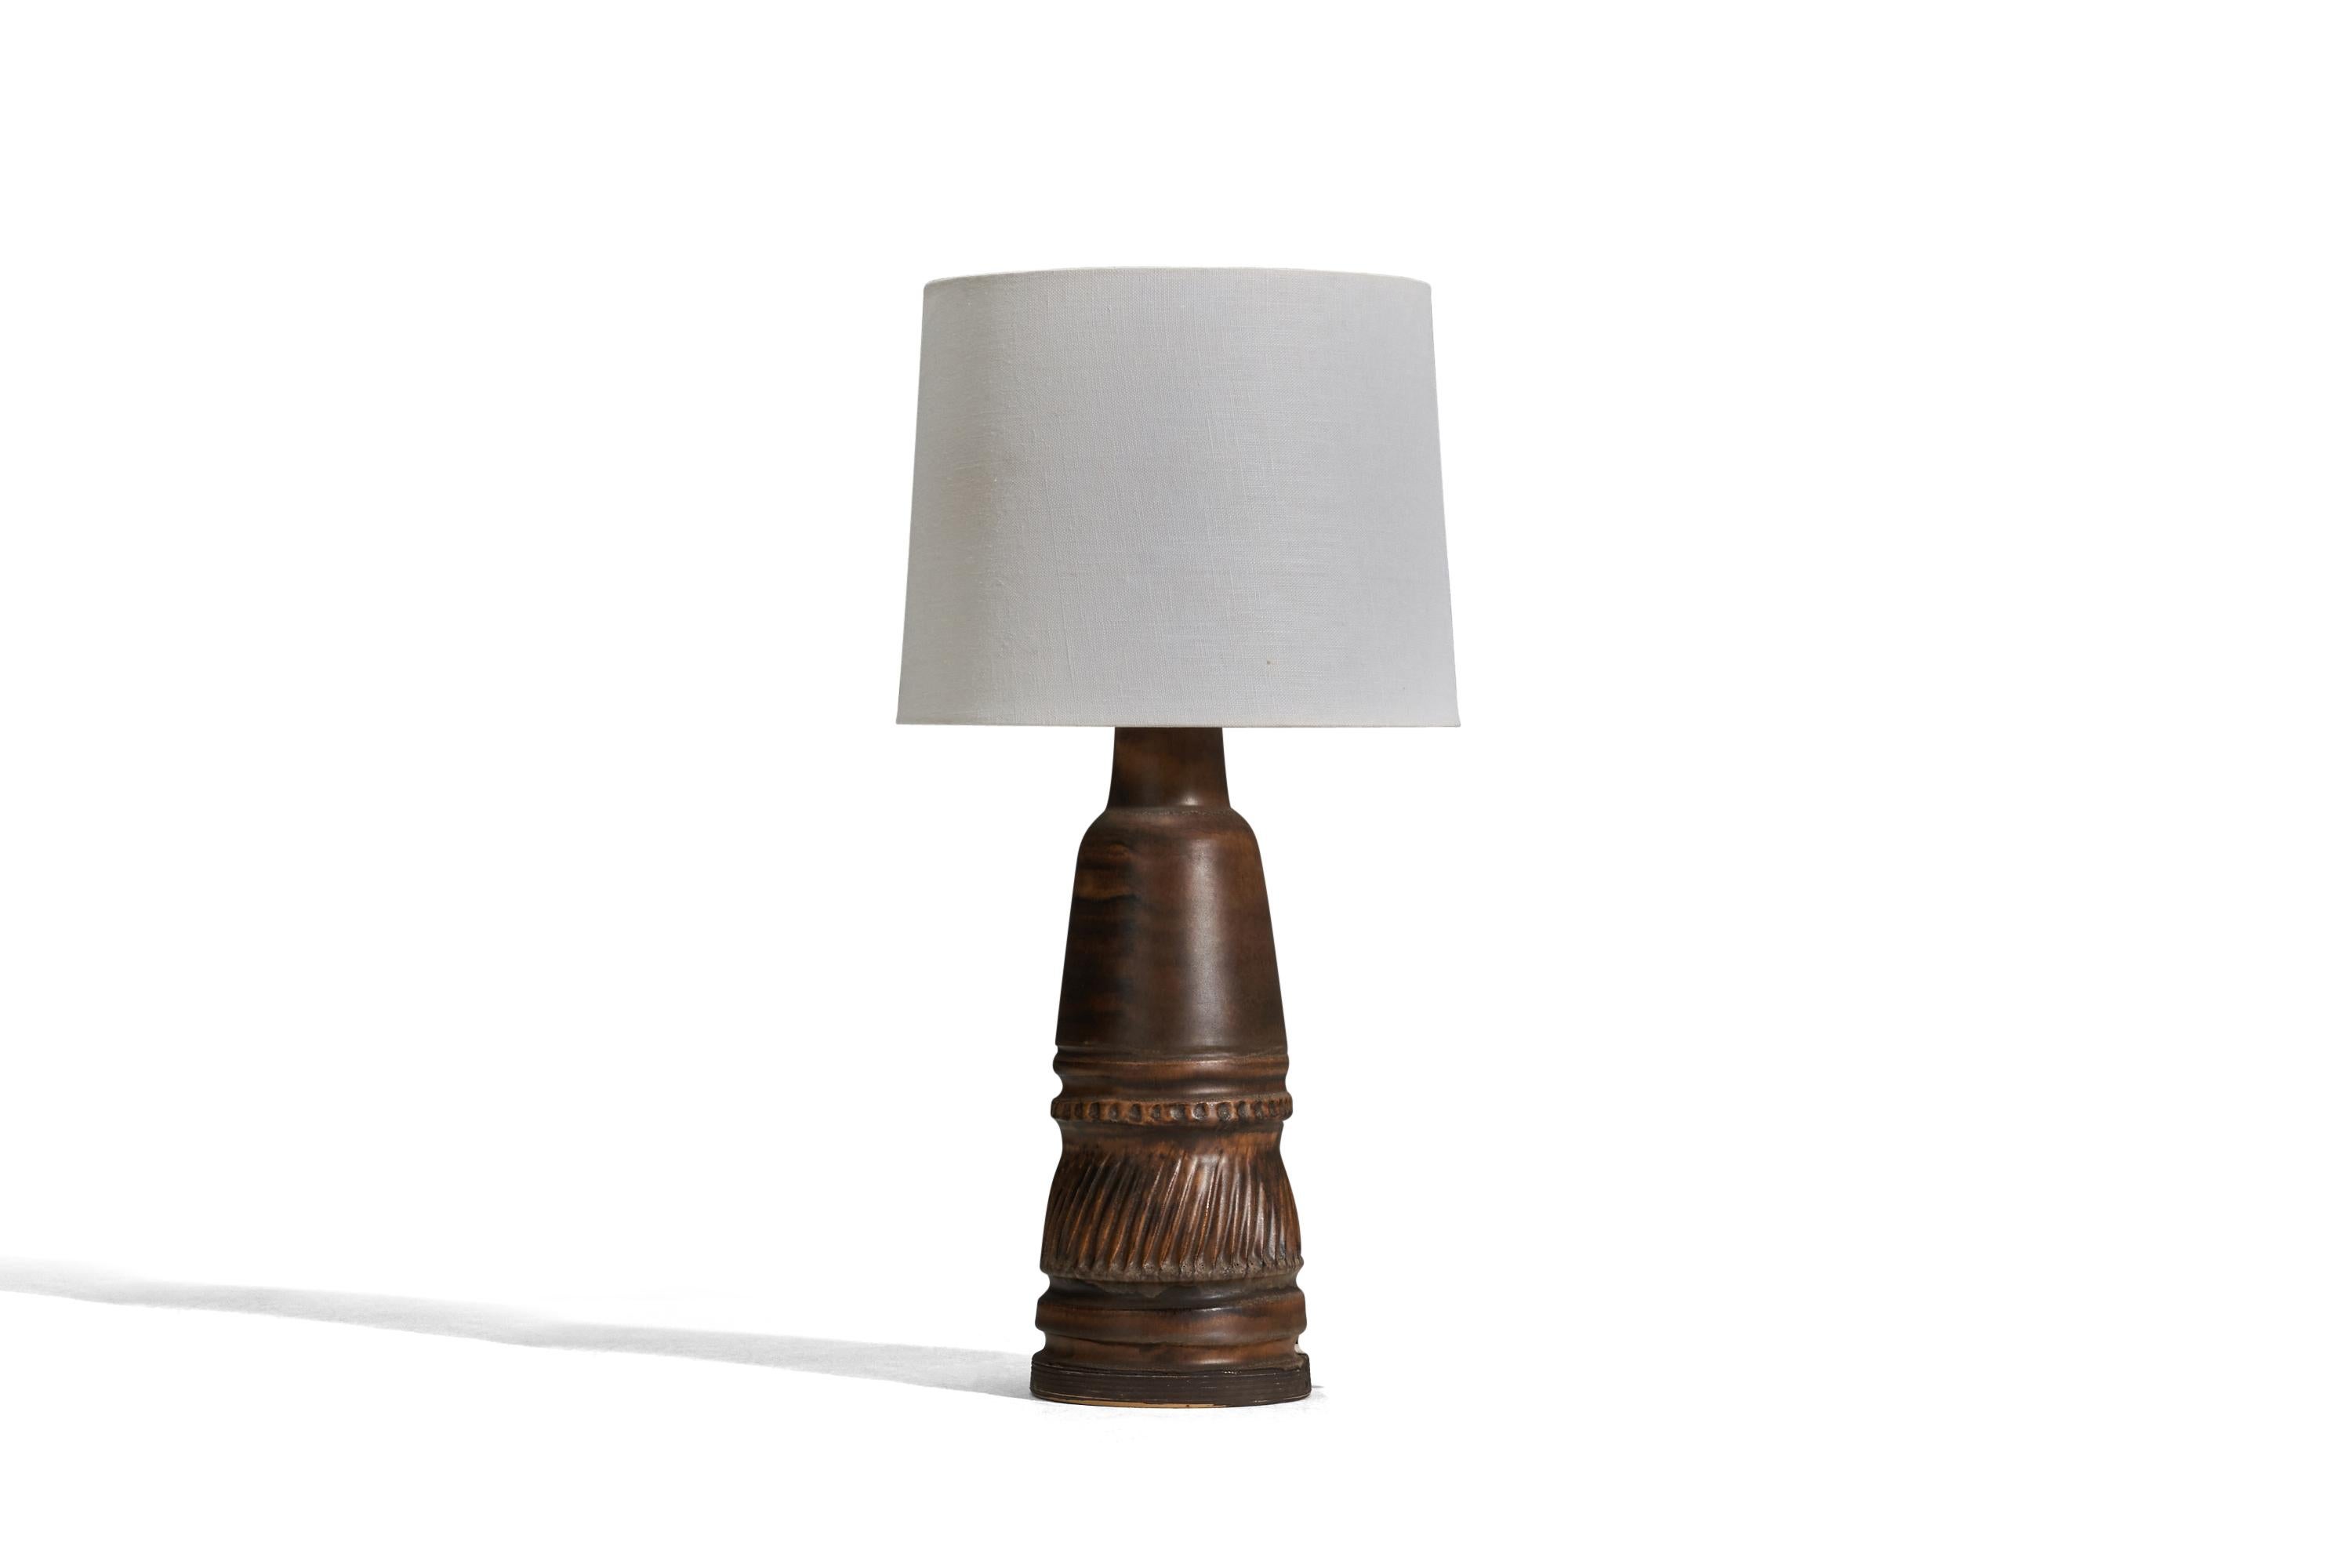 A brown glazed stoneware table lamp designed and produced by Irma Yourstone, Sweden, 1960s.

Sold without lampshade
Dimensions of lamp (inches) : 14.56 x 5.07 x 5.07 (Height x Width x Depth)
Dimensions of lampshade (inches) : 9 x 10 x 8 (Top